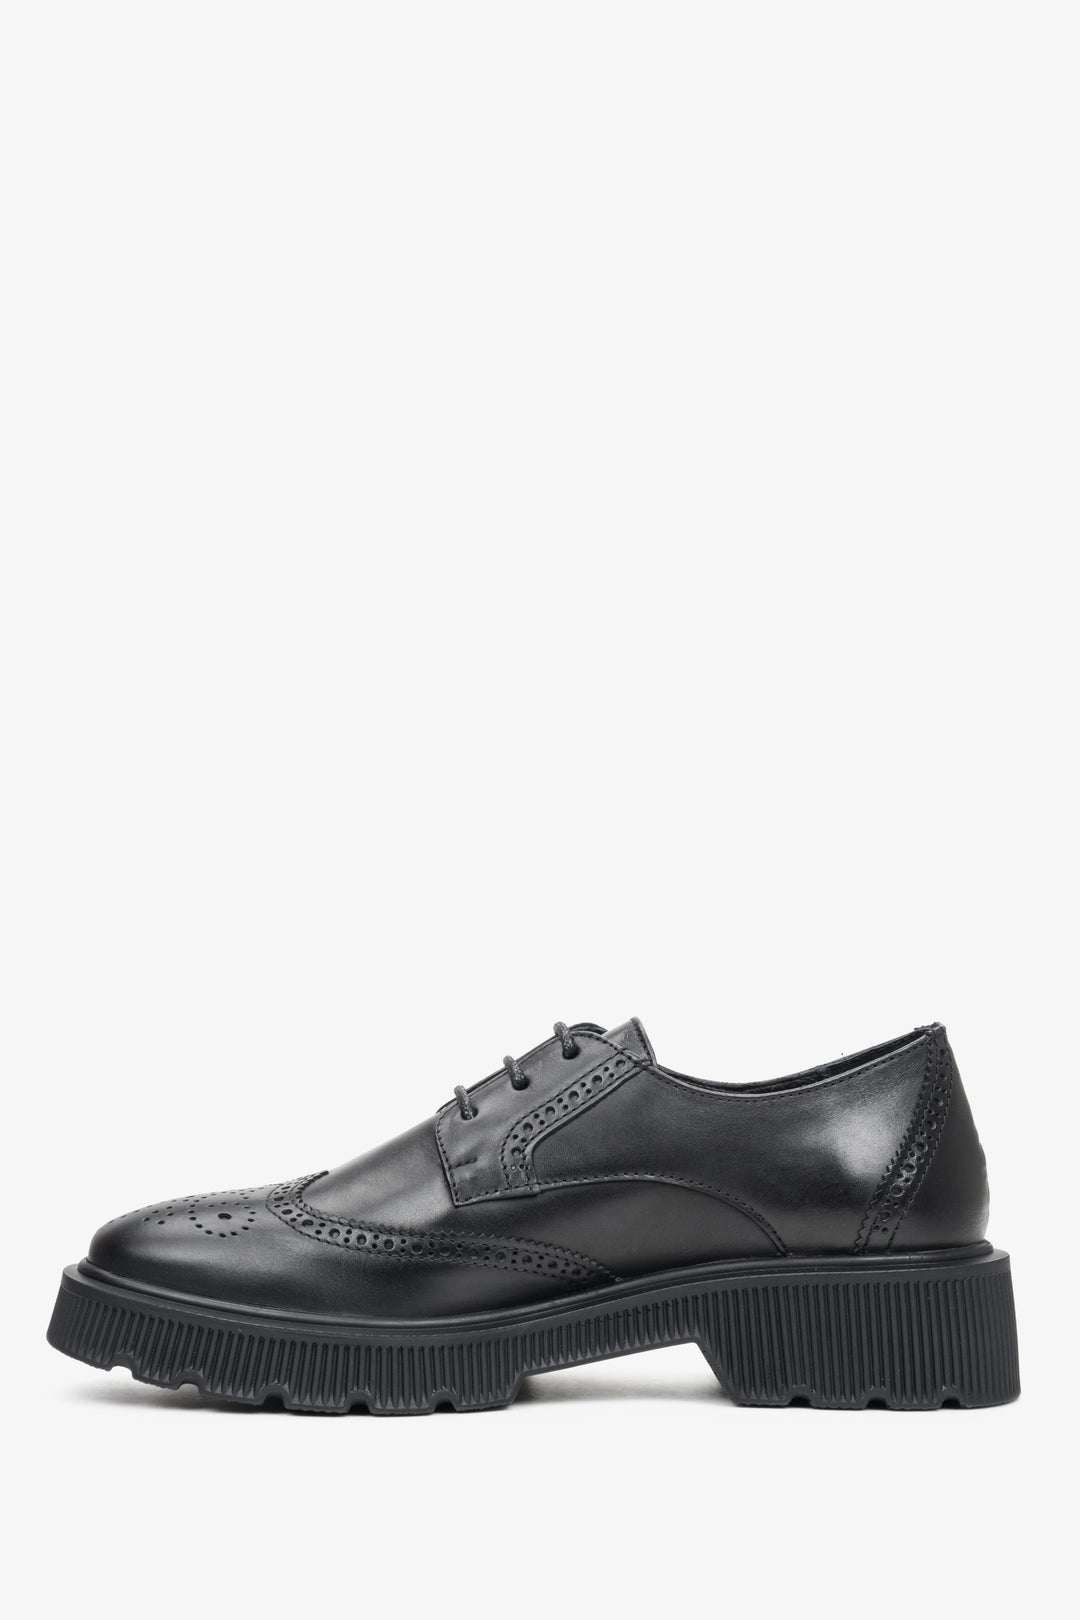 Lace-up, women's black leather shoes made from genuine leather by Estro - side seam of the shoe.